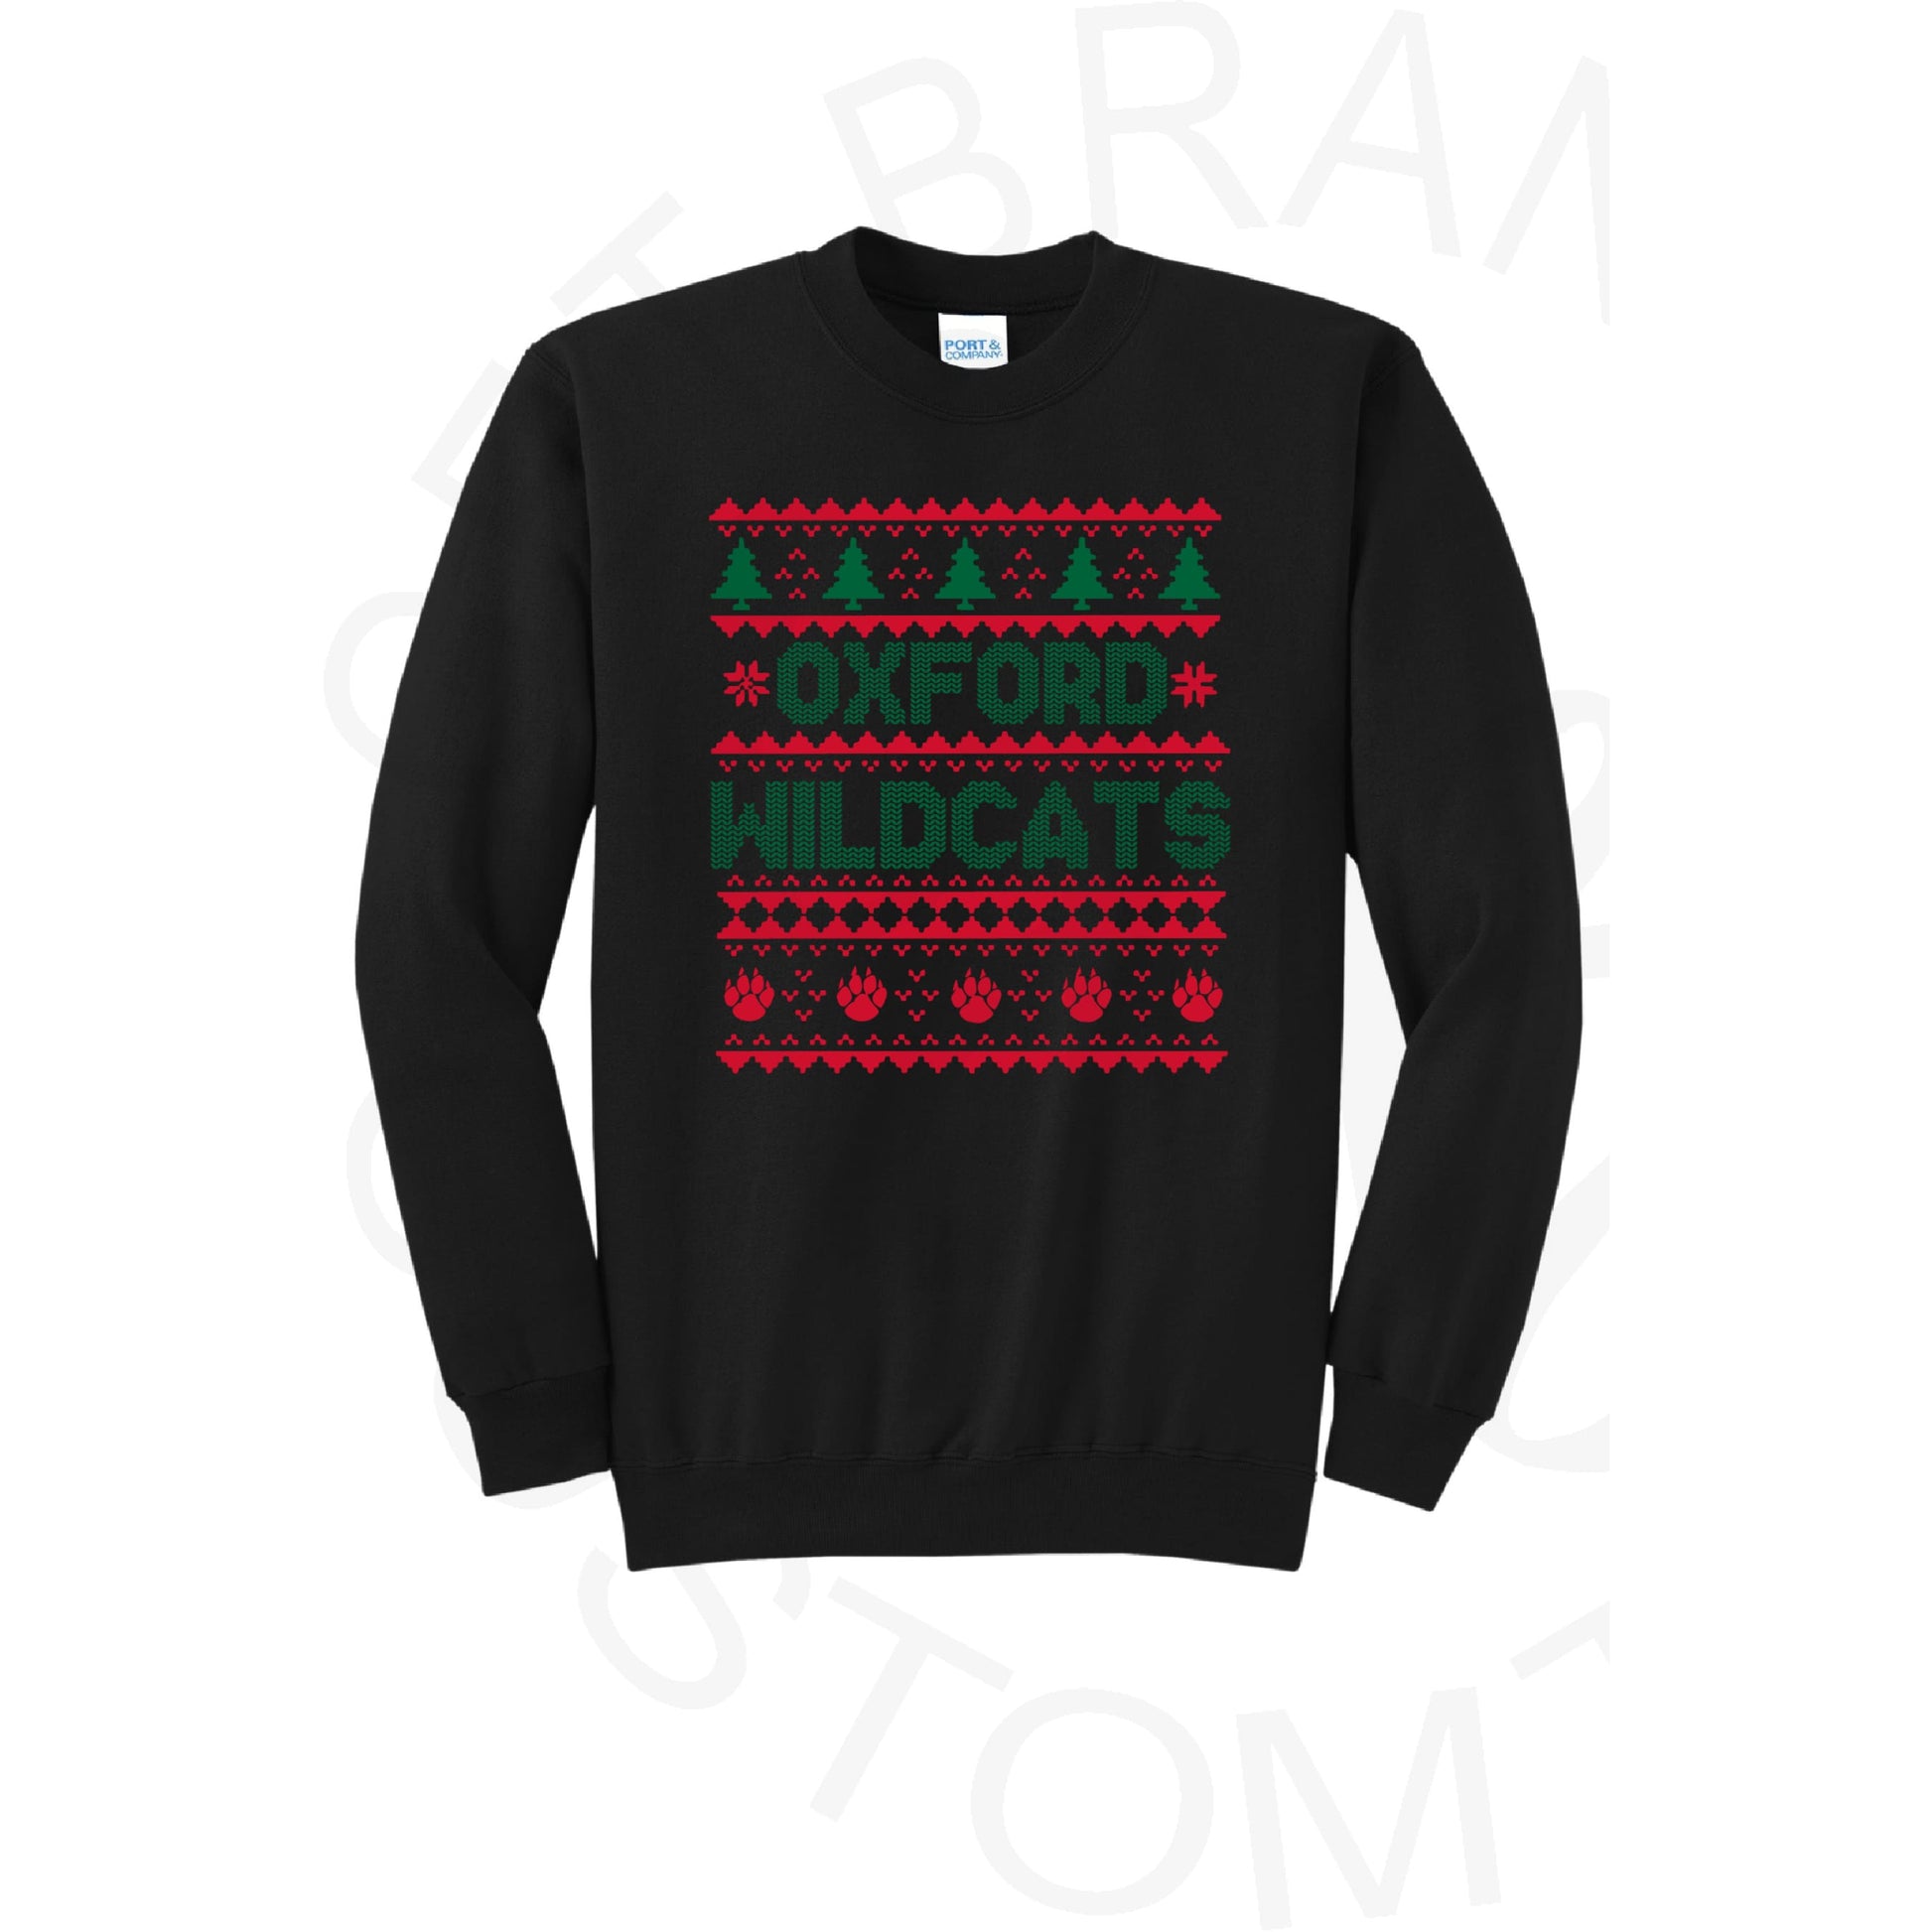 Oxford Wildcats YOUTH Ugly Sweater- PREORDER